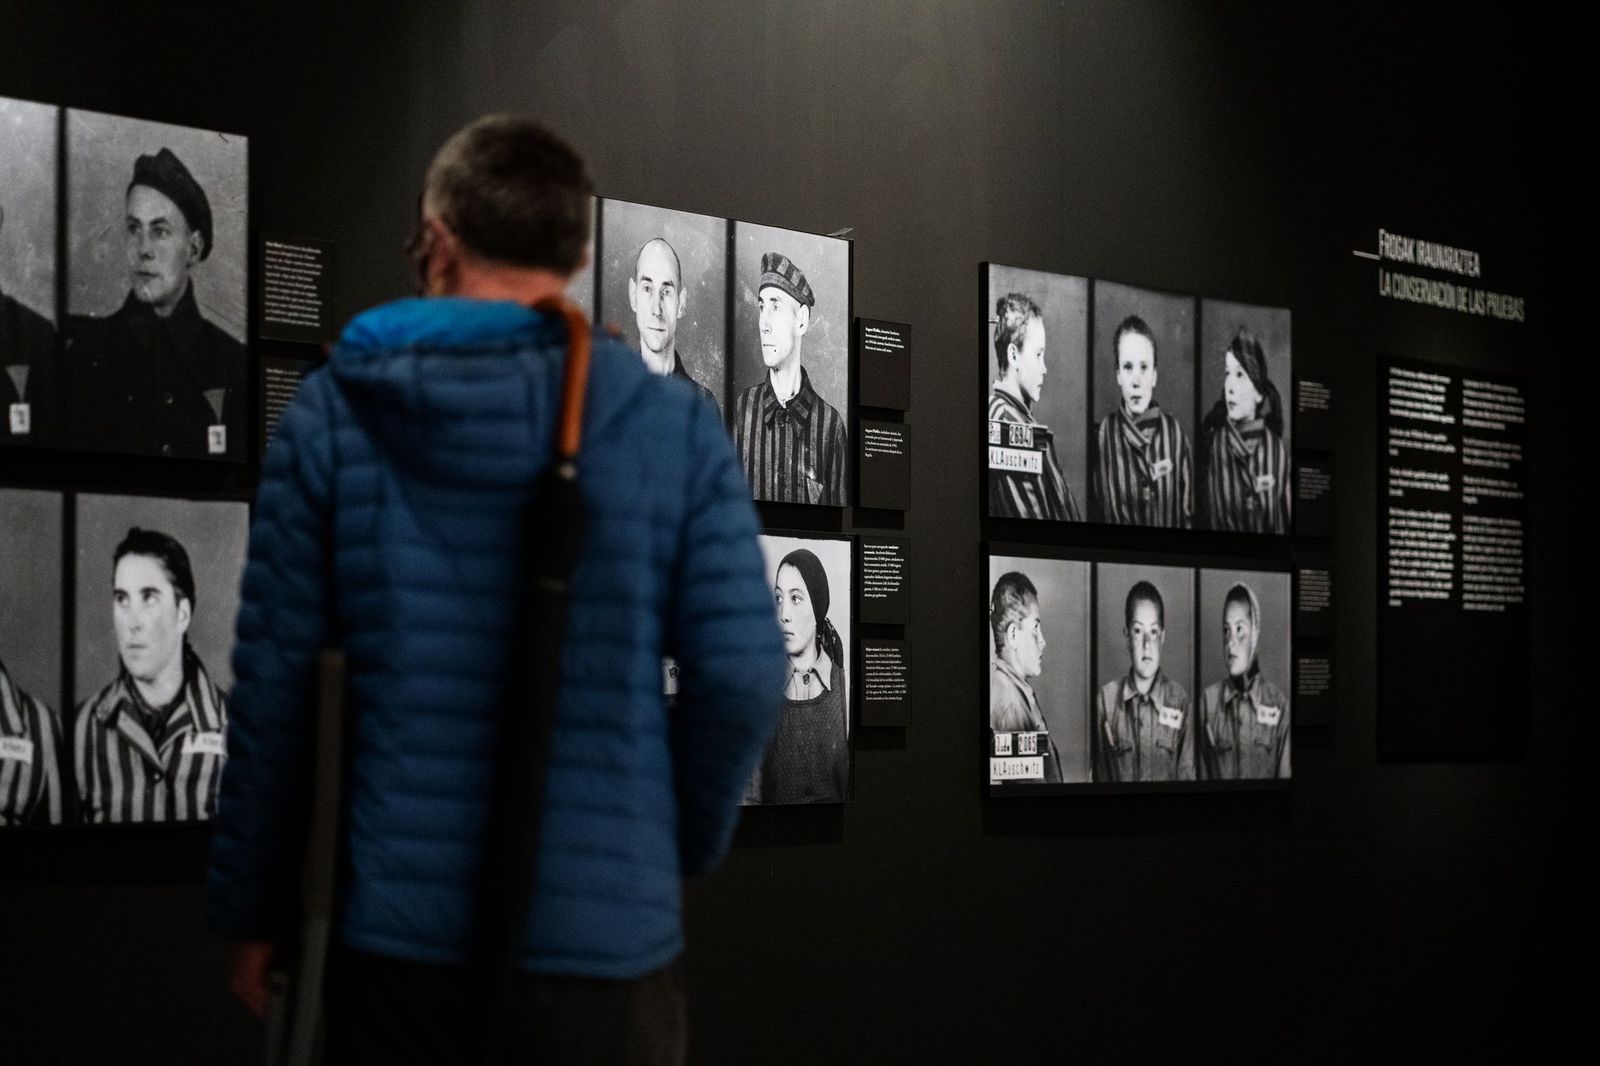 Seeing Auschwitz is a timely reminder of the importance of documenting atrocities